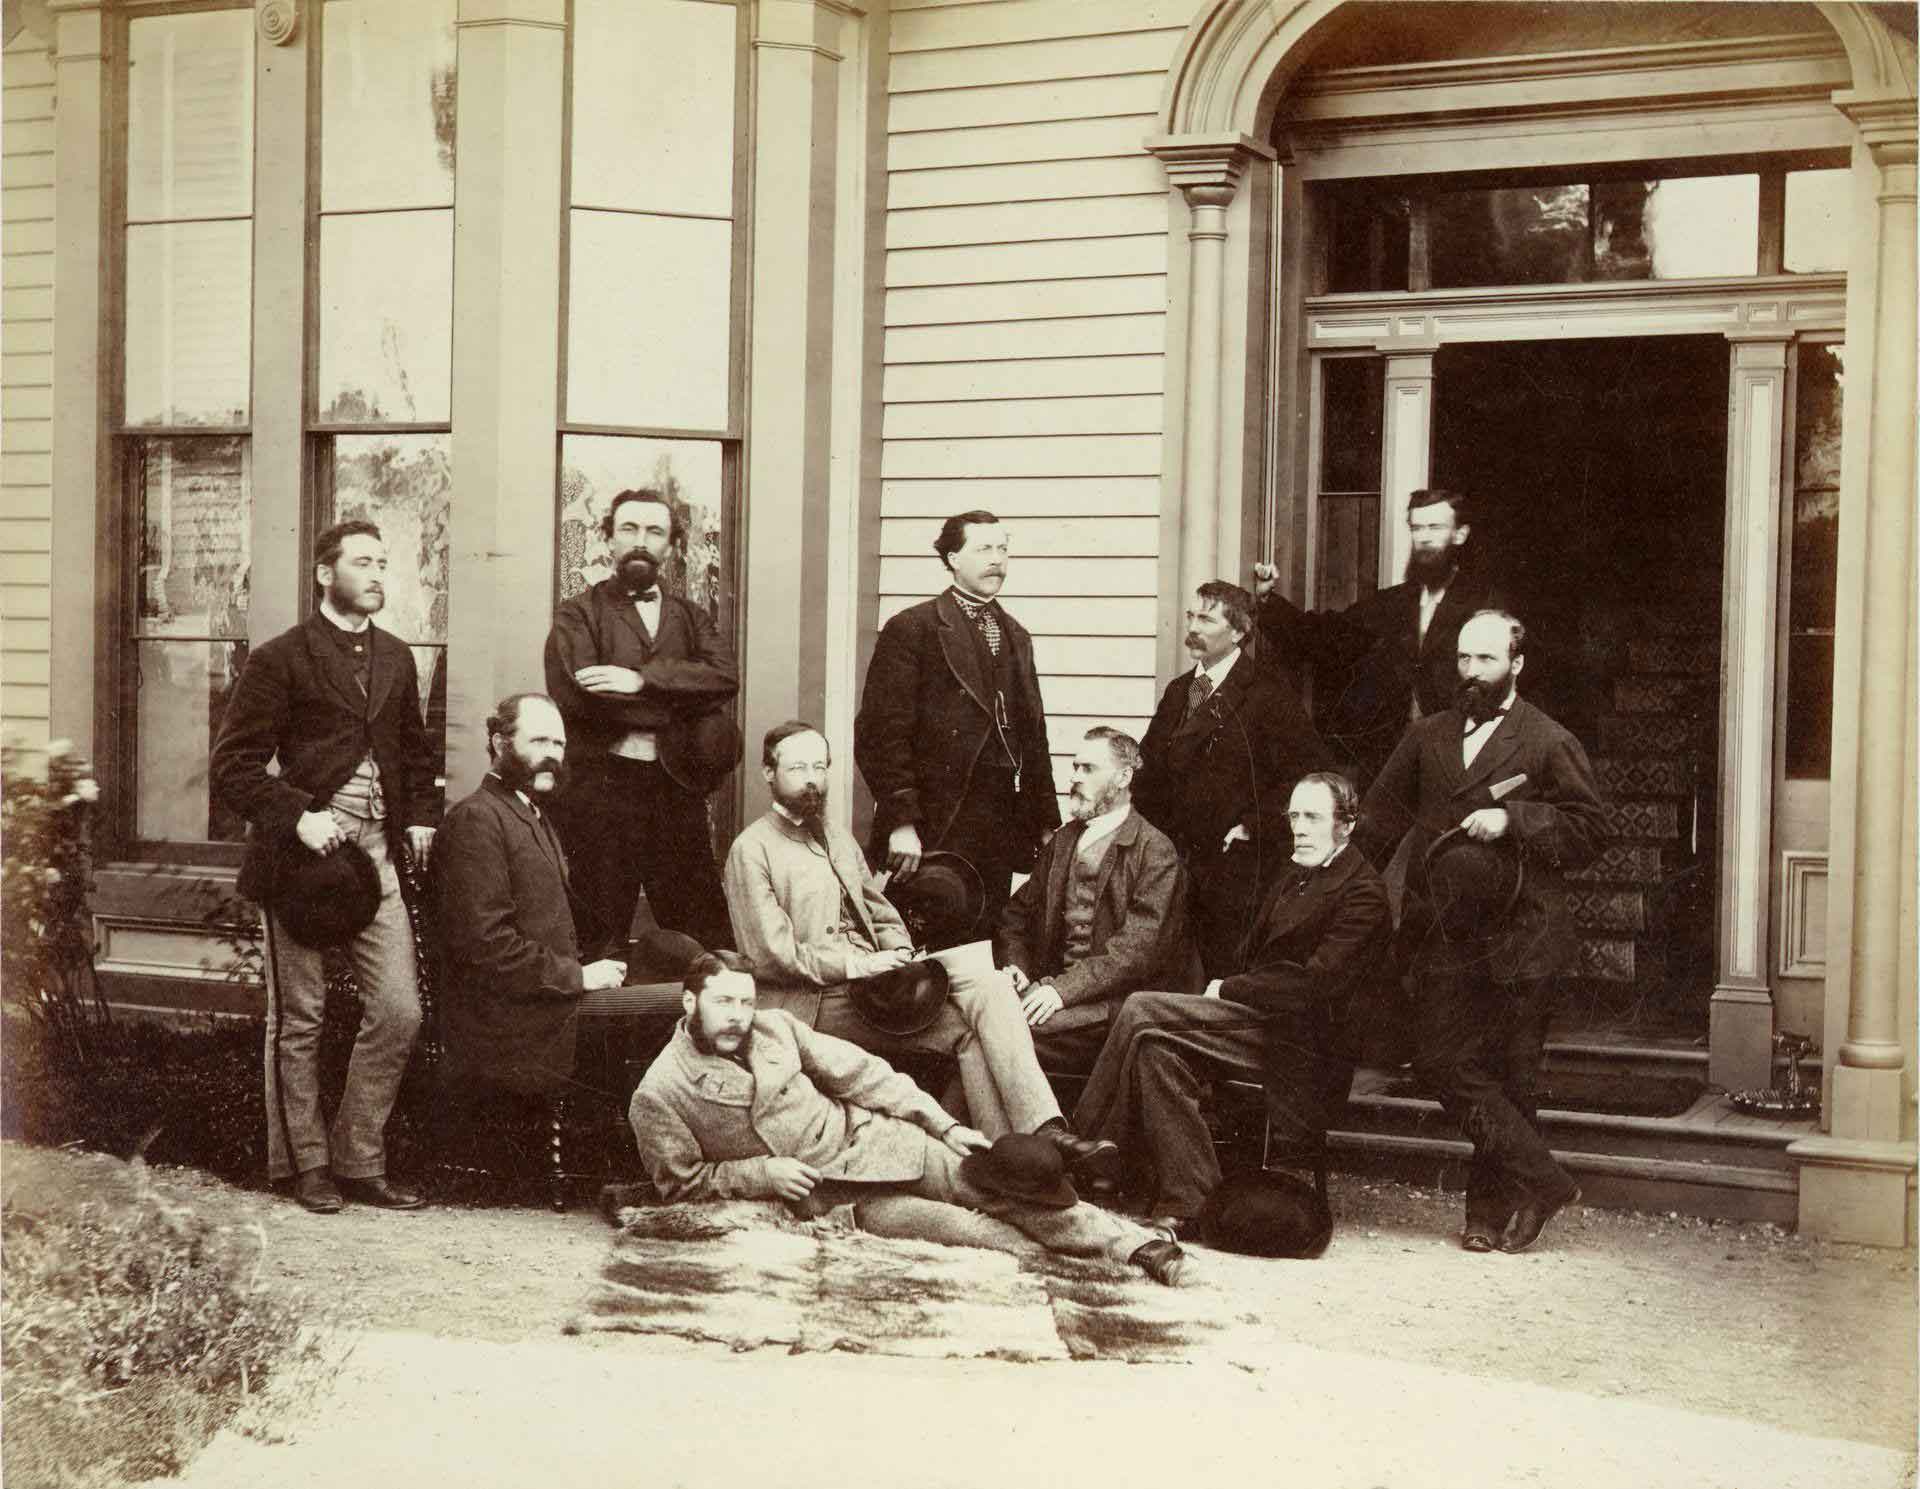 The First Canadian Pacific R.R. and Geological Survey parties for British Columbia, July 22 1871 Left to right : L. N. Rheaumis, Roderick McLennan, A. S. Hall, West West Ireland, Alfred Selwyn, Alex Maclennan, Walter Moberly, C. E. Gilette, James Richardson, -- -- McDonald, George Watt.